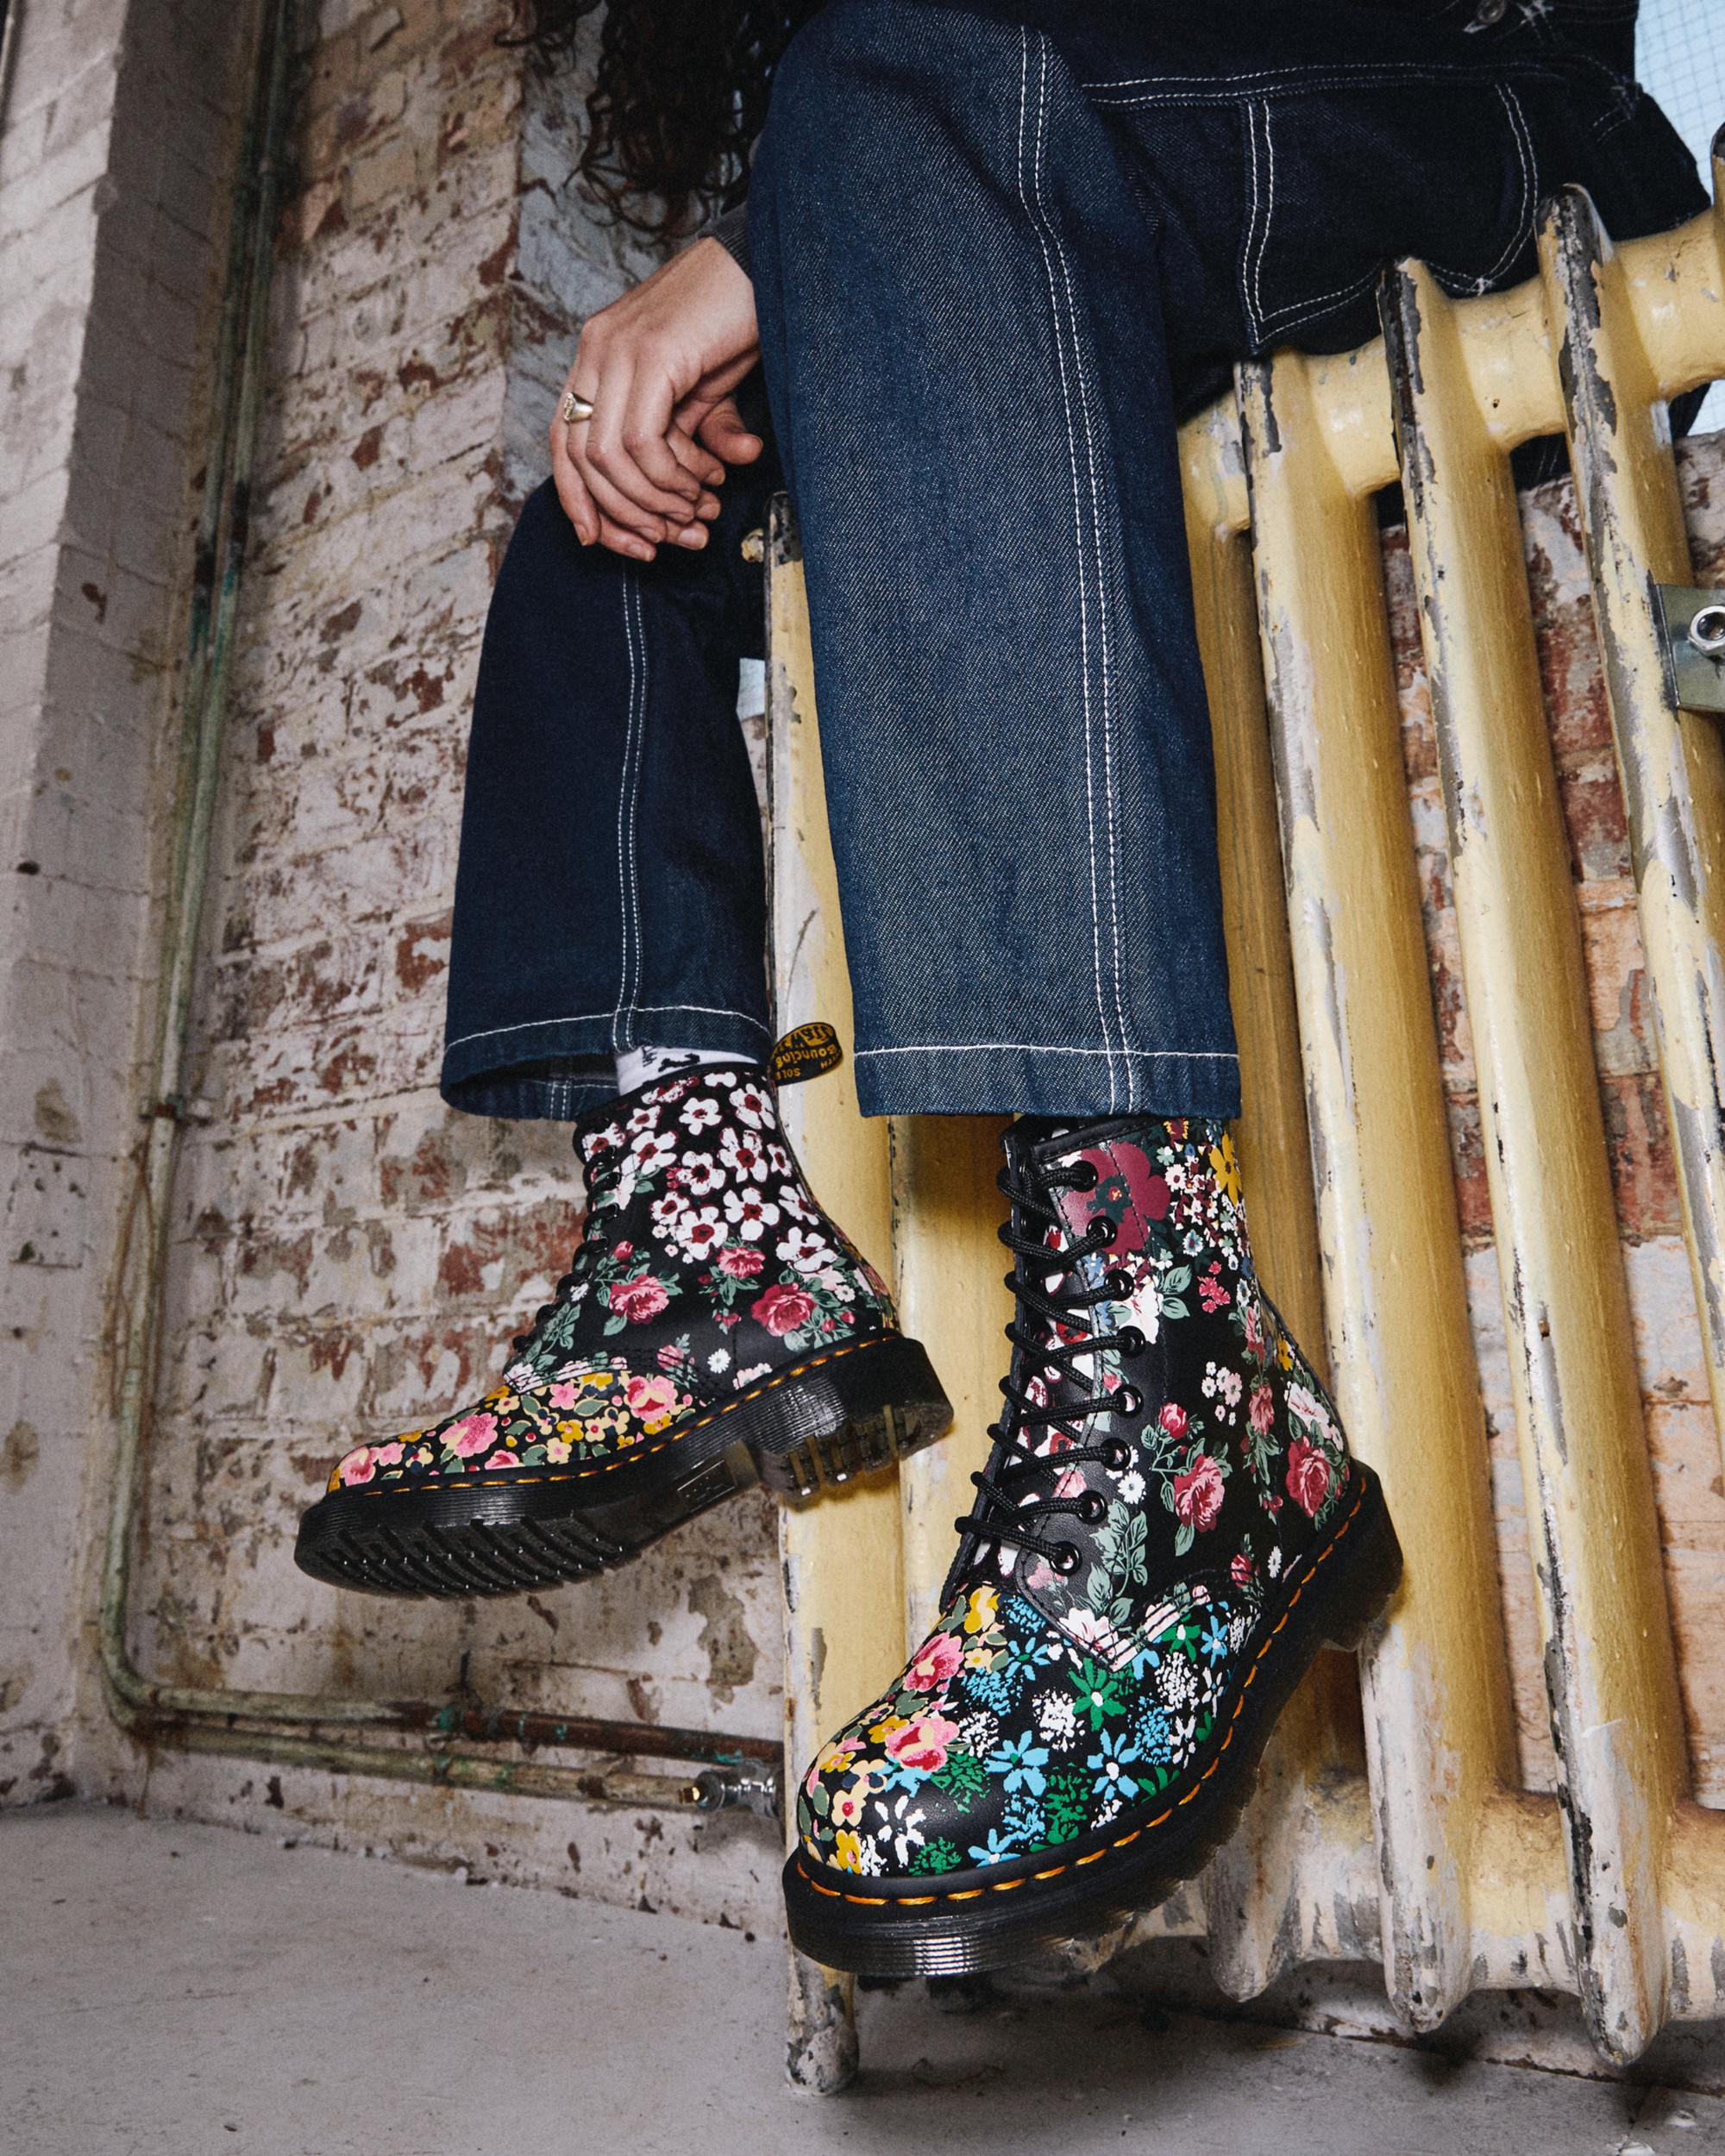 Pascal Up Leather Lace White Martens in | Dr. 1460 Floral Boots Up Mash